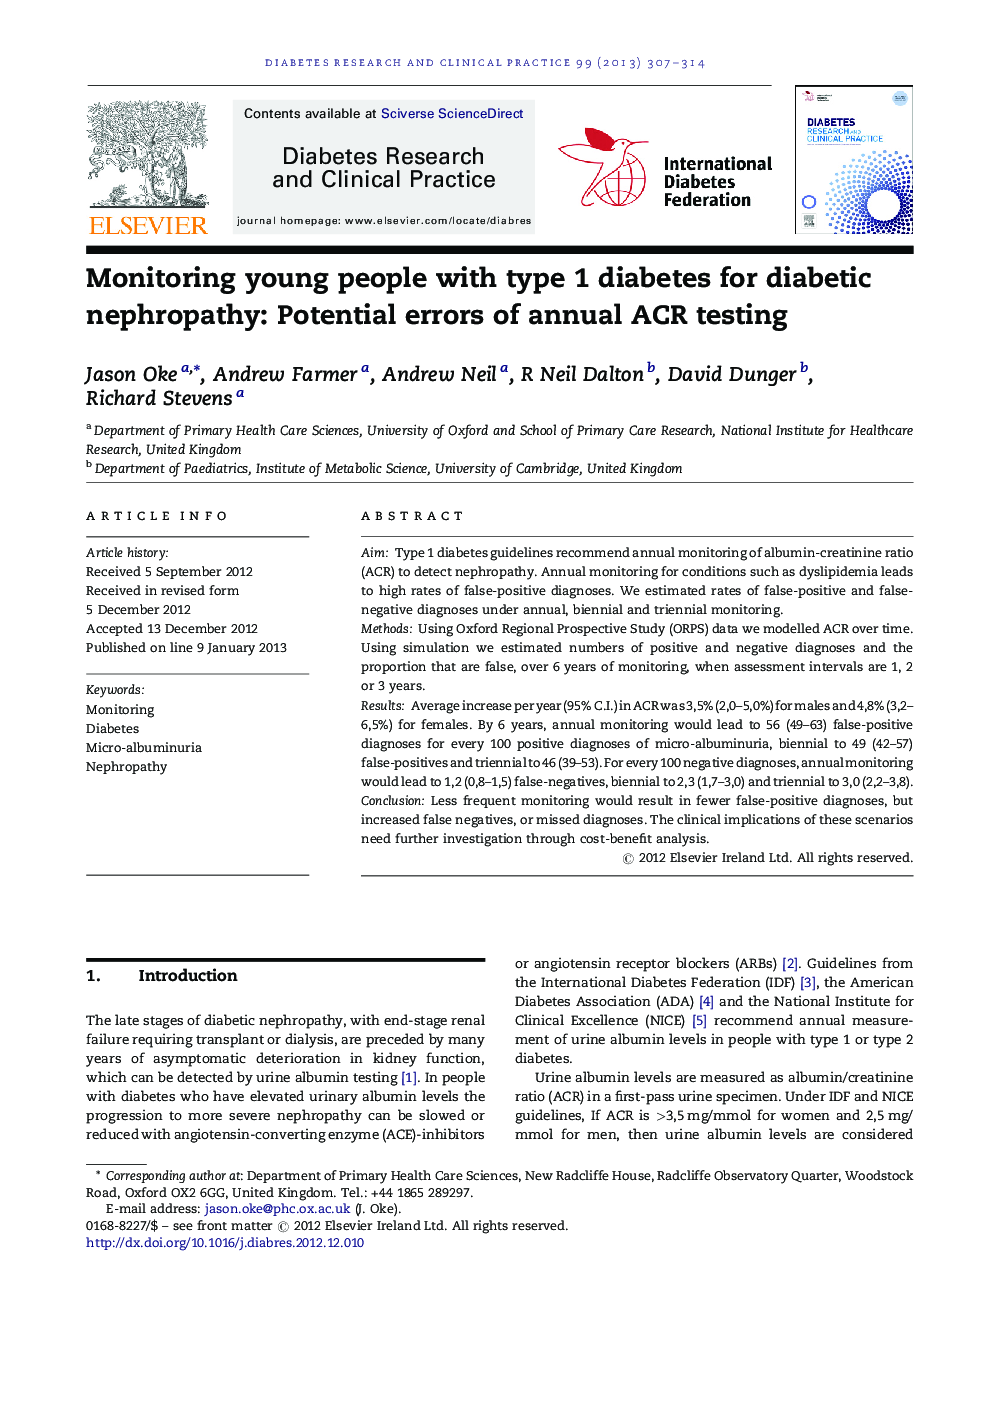 Monitoring young people with type 1 diabetes for diabetic nephropathy: Potential errors of annual ACR testing